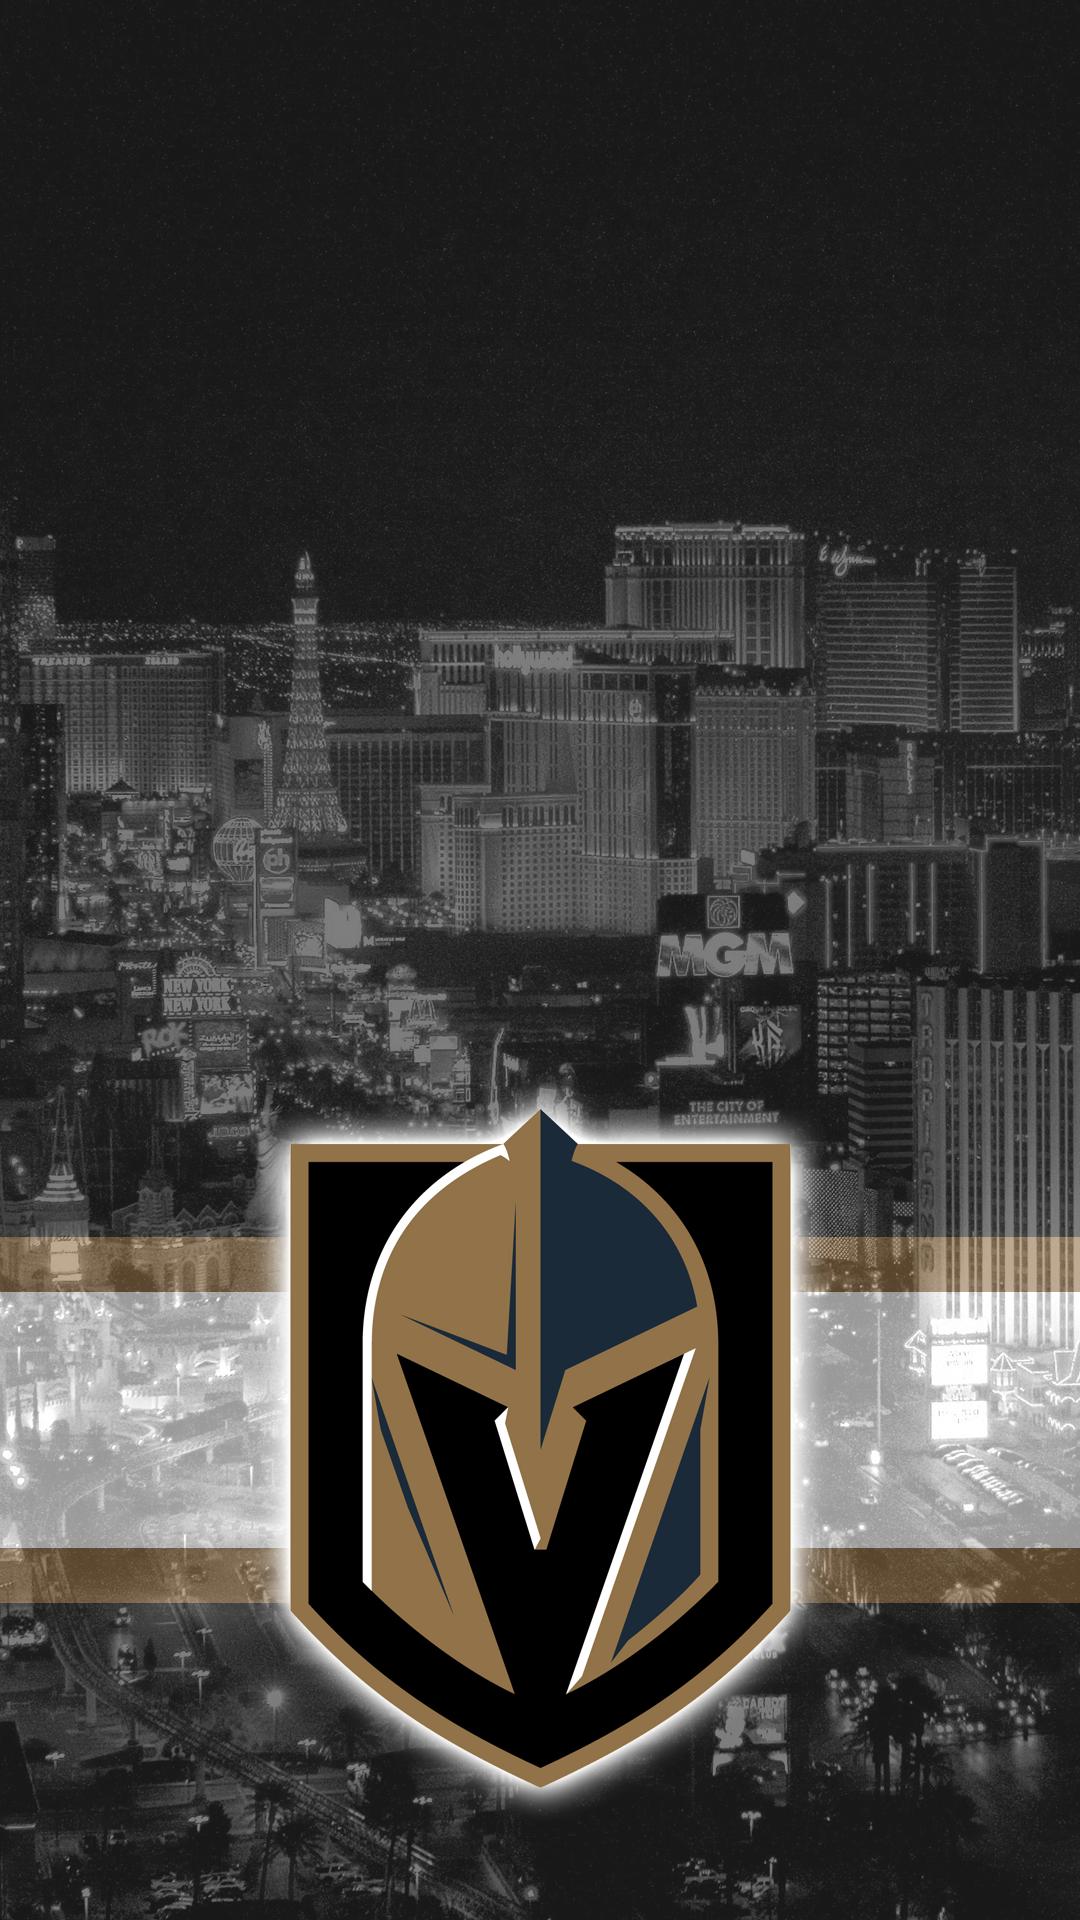 Golden Knights fans: I made some phone wallpaper for your team